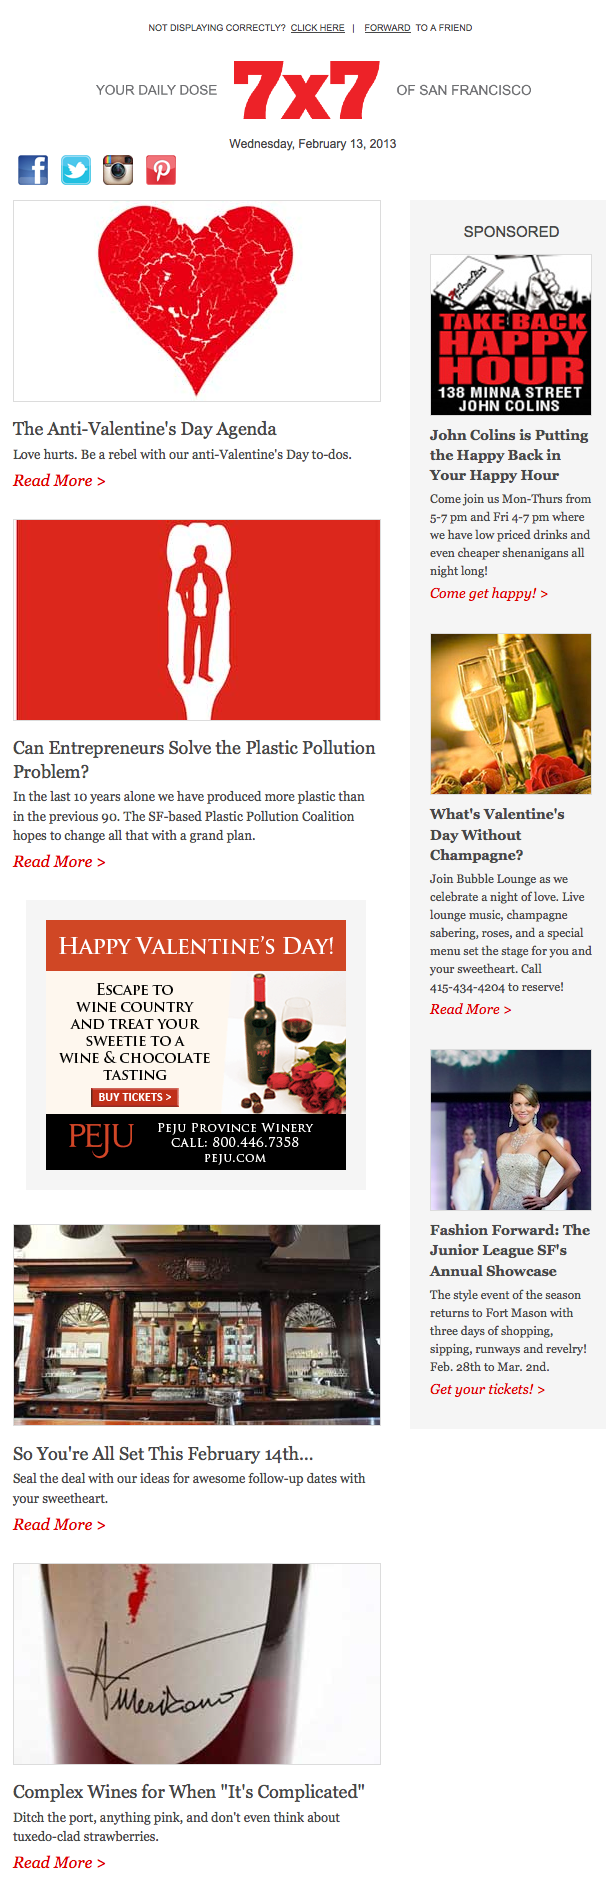 14 Sweet Valentine's Day Email Subject Lines + 3 Ways to Spice Up Your Emails